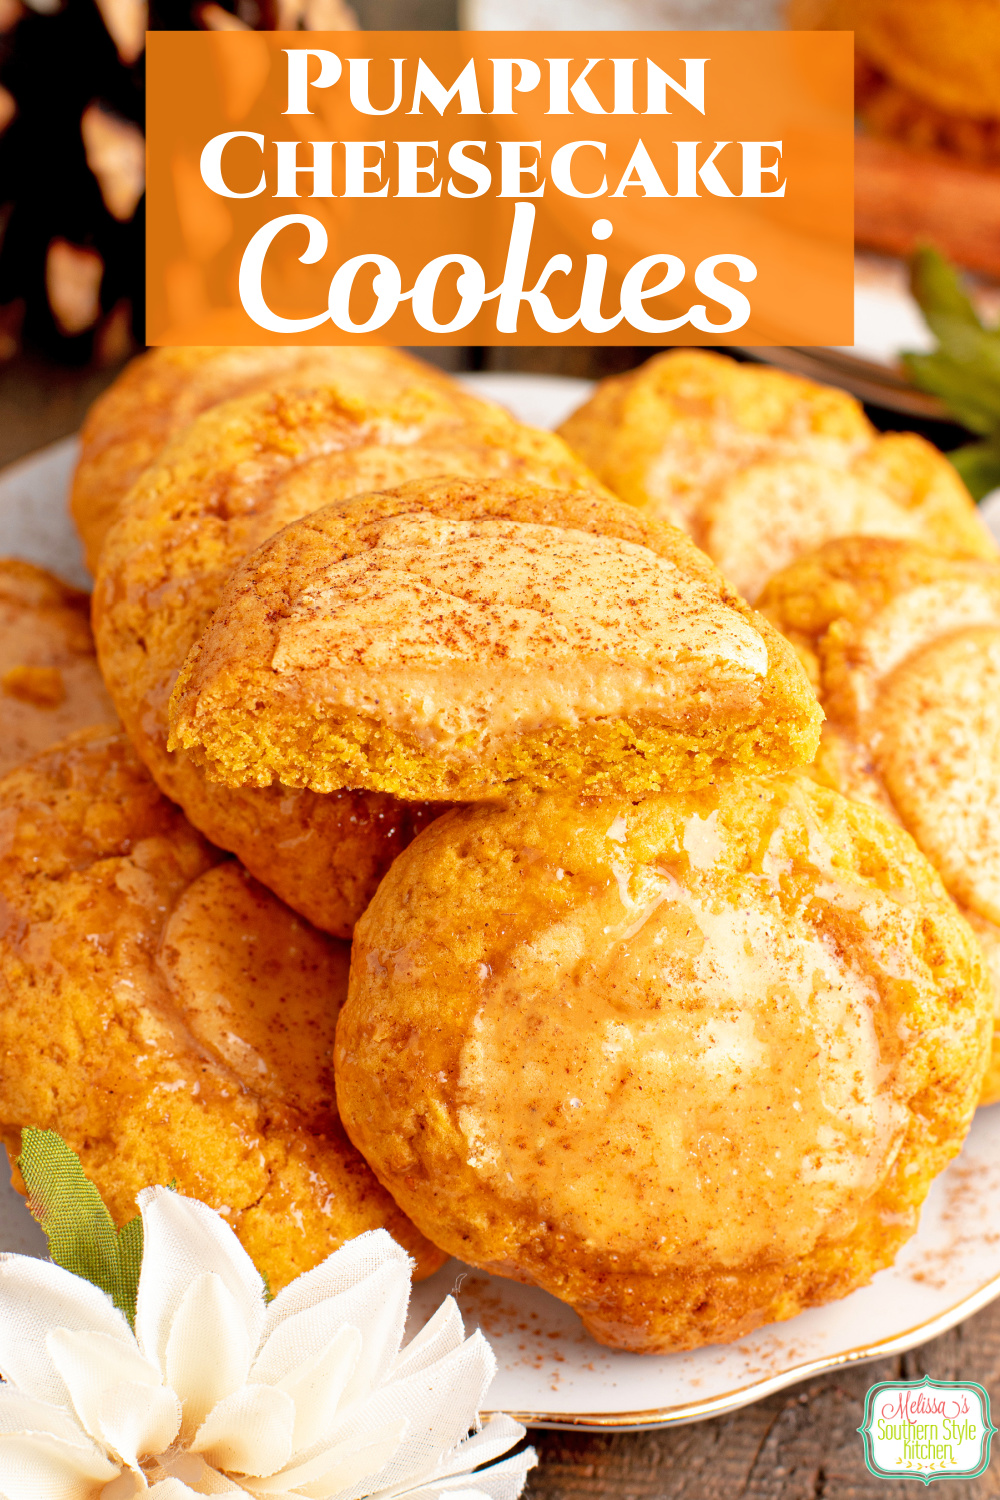 These homemade Pumpkin Cheesecake Cookies have a buttery graham cracker base with a hint of pumpkin and warm fall spices #pumpkinrecipes #pumpkincookies #pumpkincheesecake #cheesecakecookies #pumpkindesserts